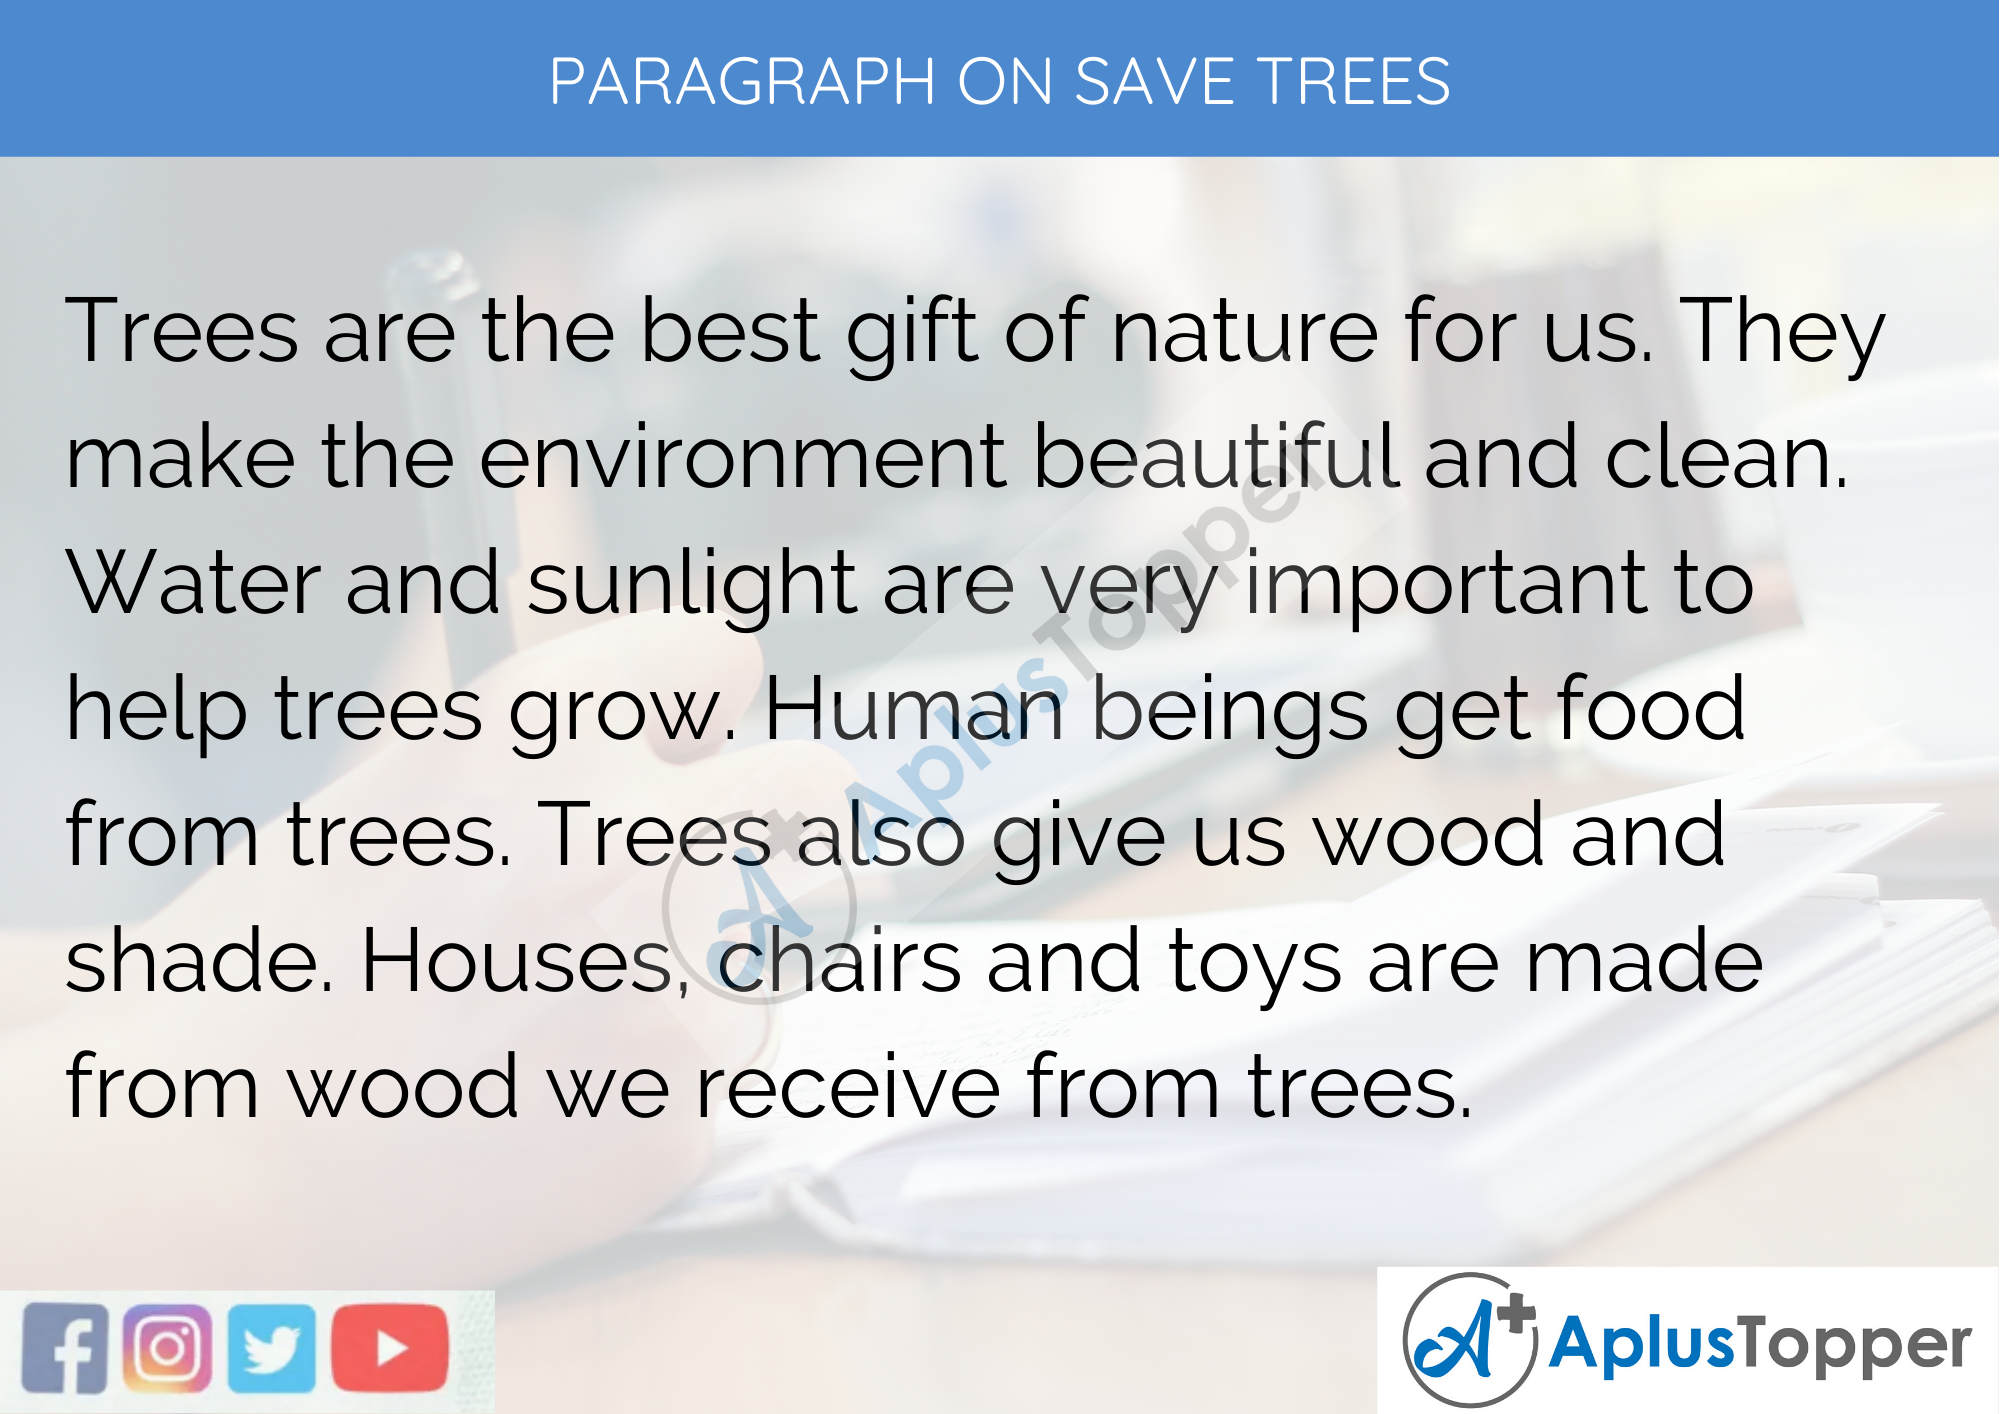 essay on importance of trees 150 words